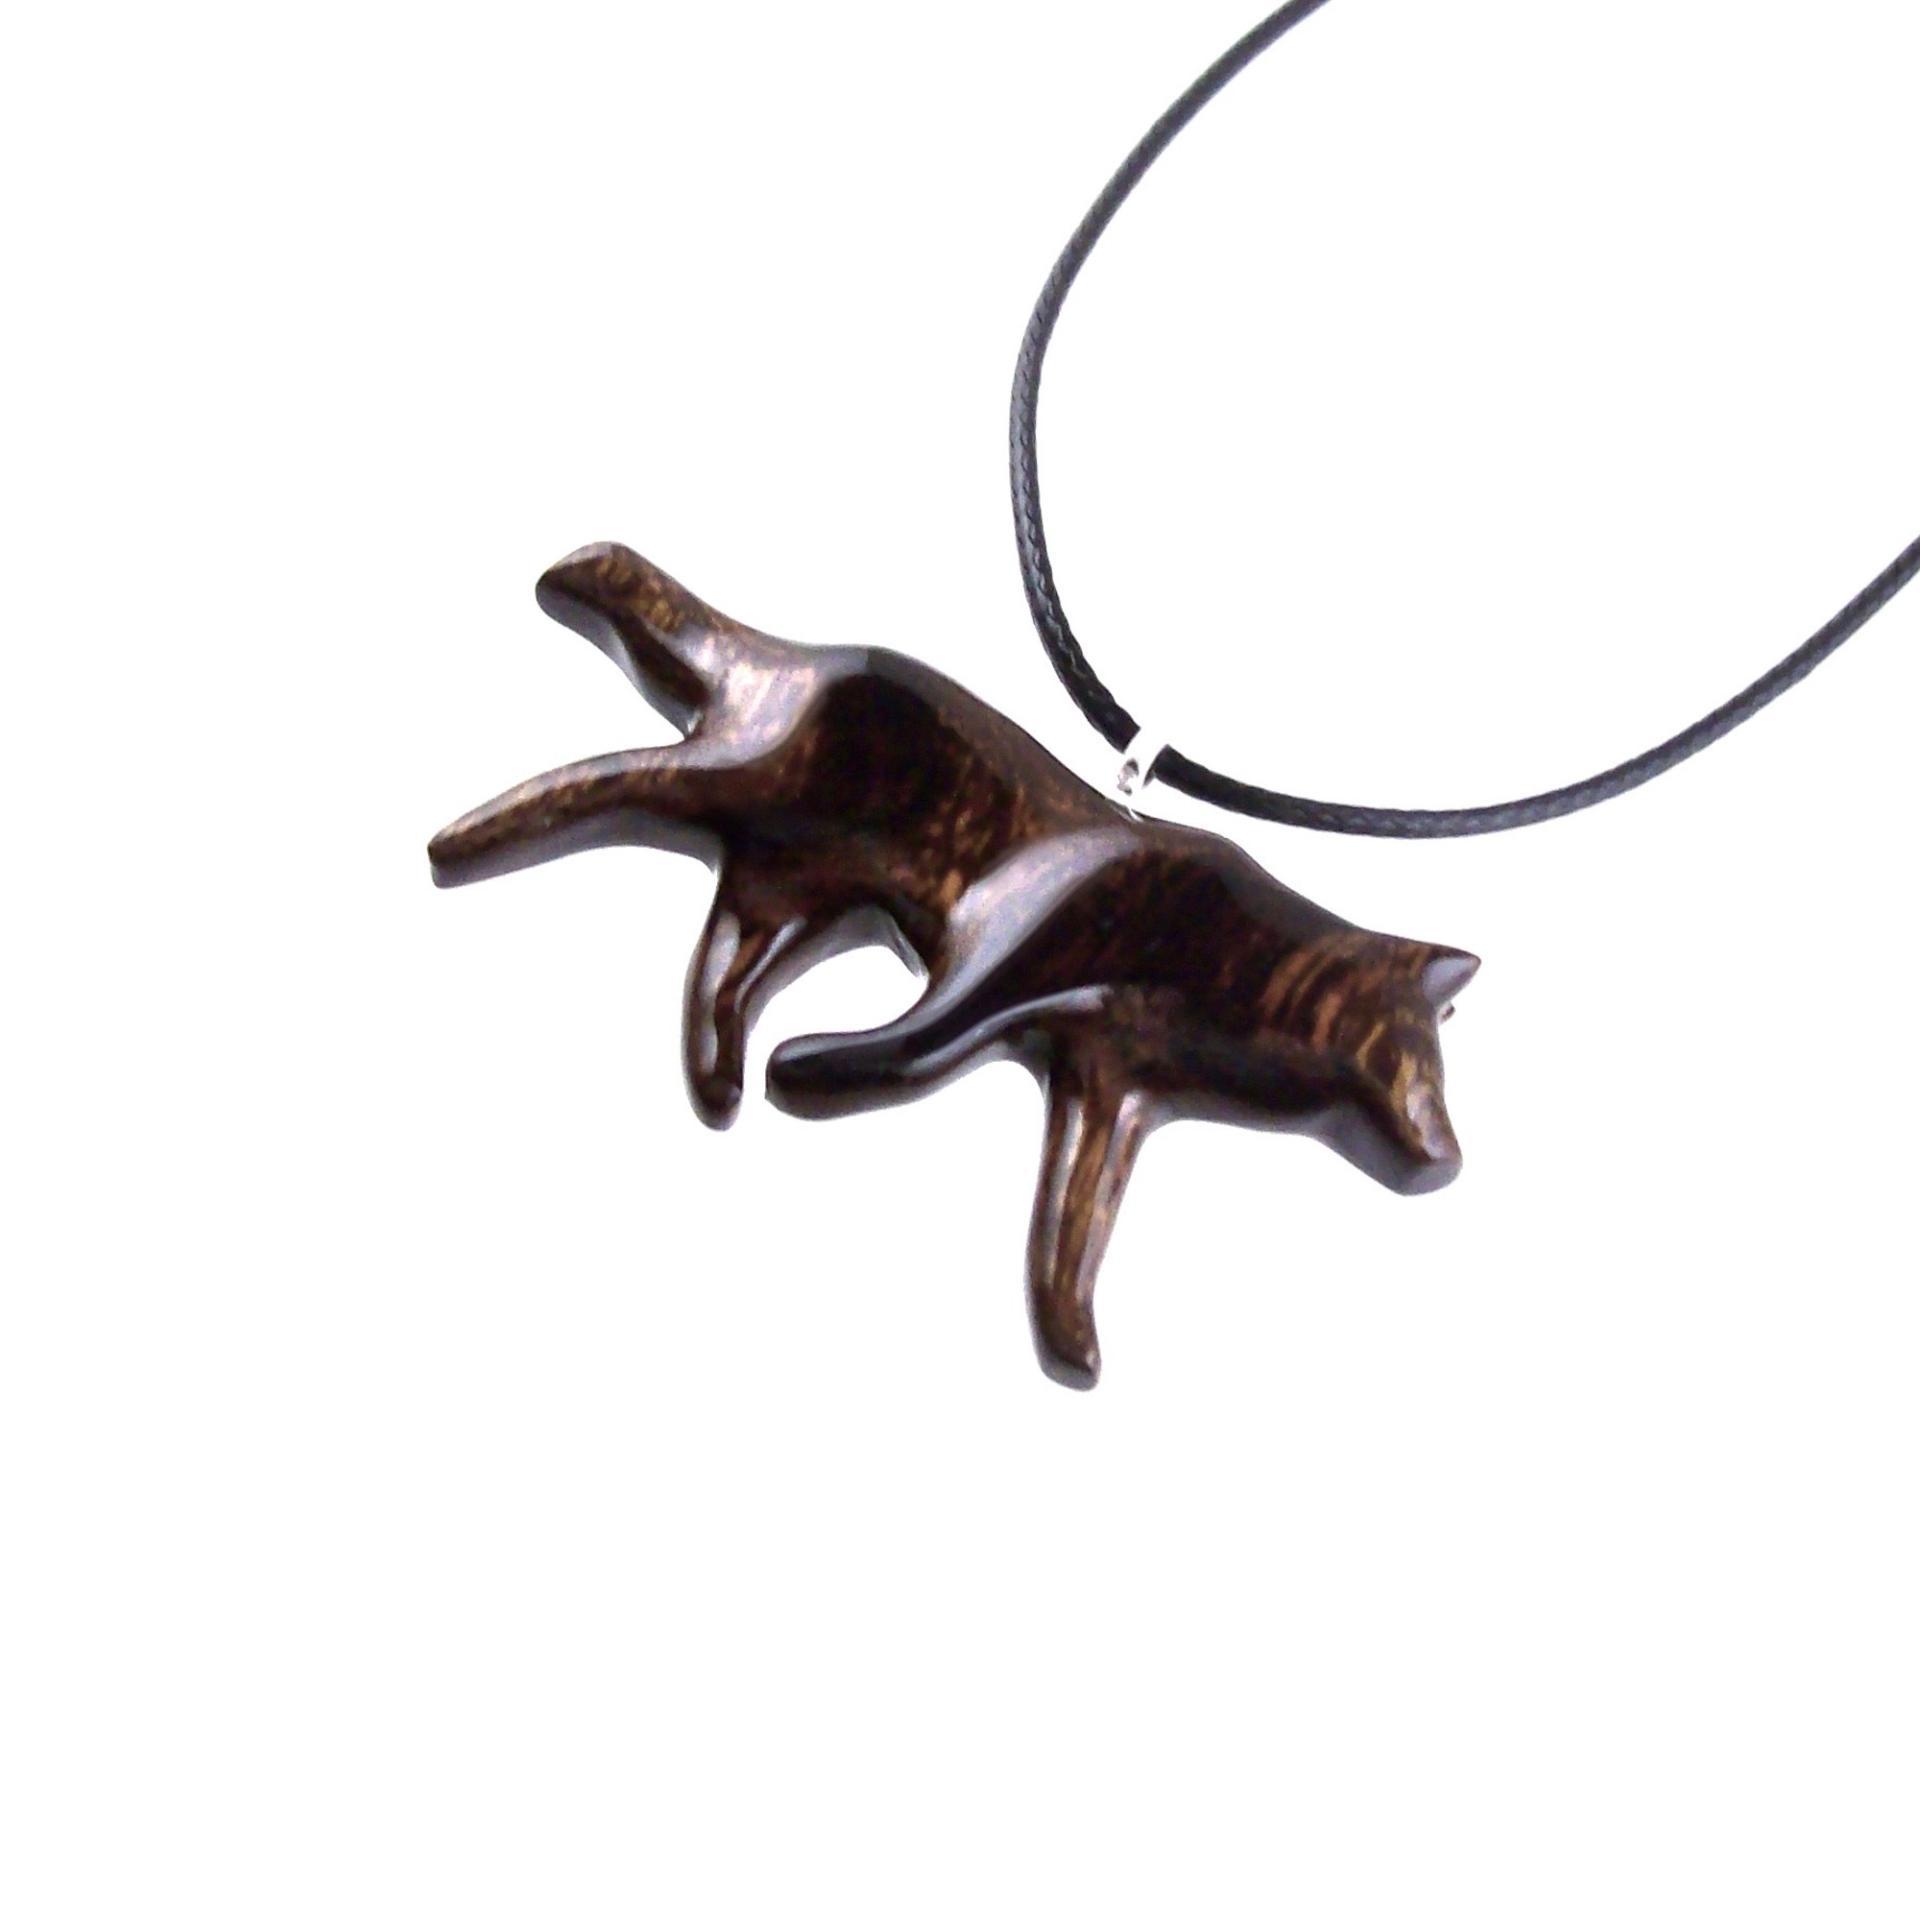 Hand Carved Wooden Wolf Necklace, Wolf Pendant, Woodland Jewelry for Men or Women, Spirit Animal Totem, Gift for Him Her